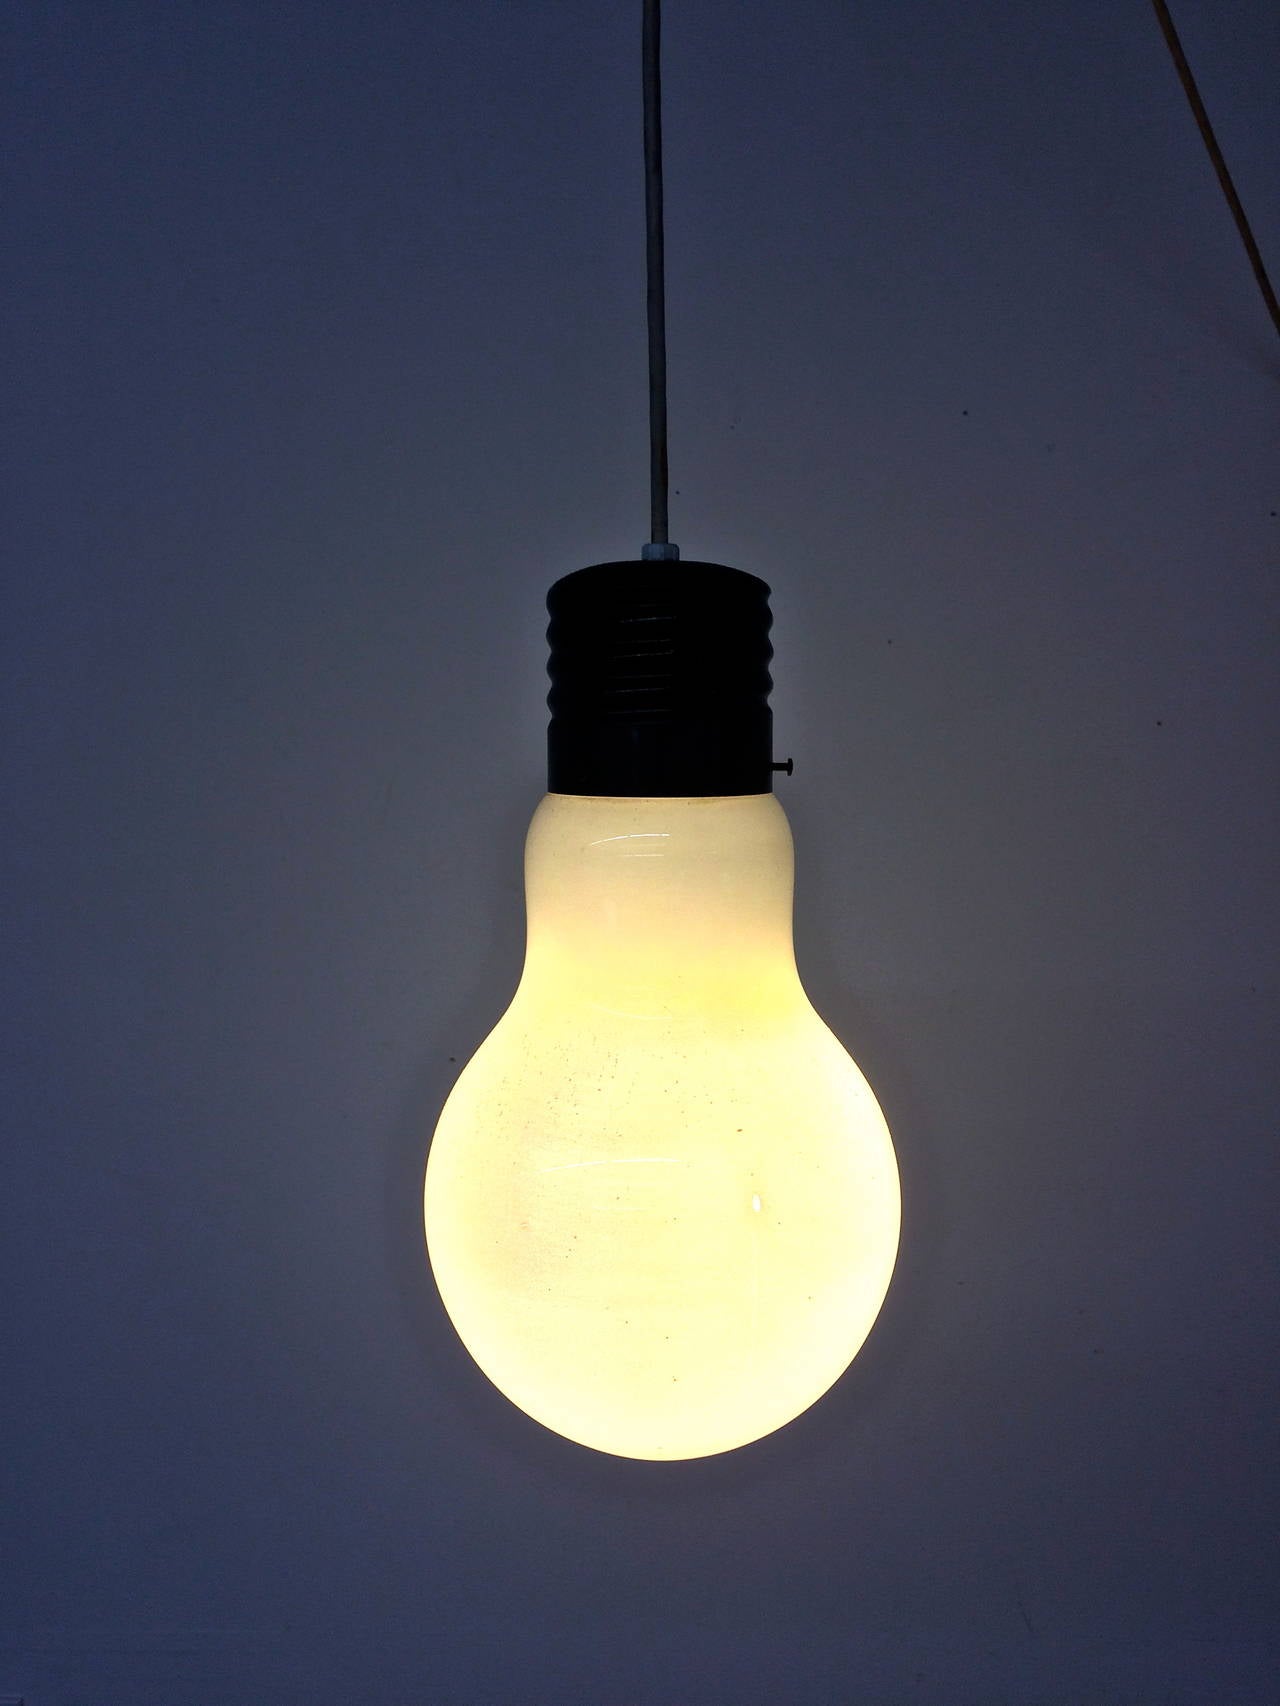 American Pop Art Light Bulb Lamp Attributed to Ingo Maurer For Sale